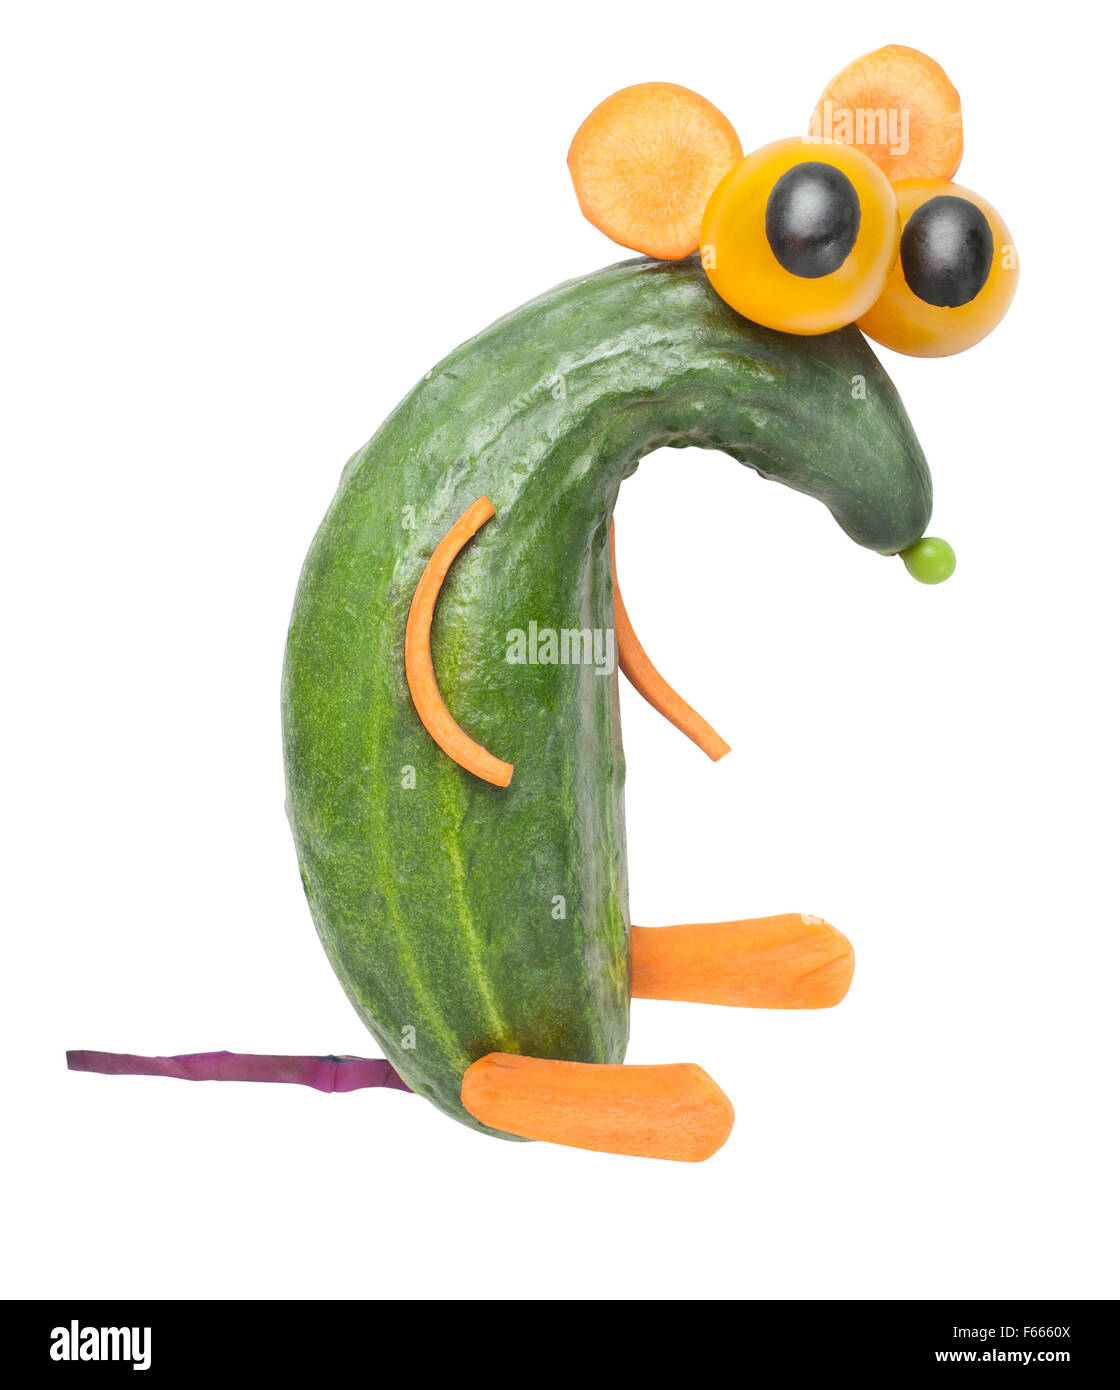 Funny rat made of cucumber Stock Photo